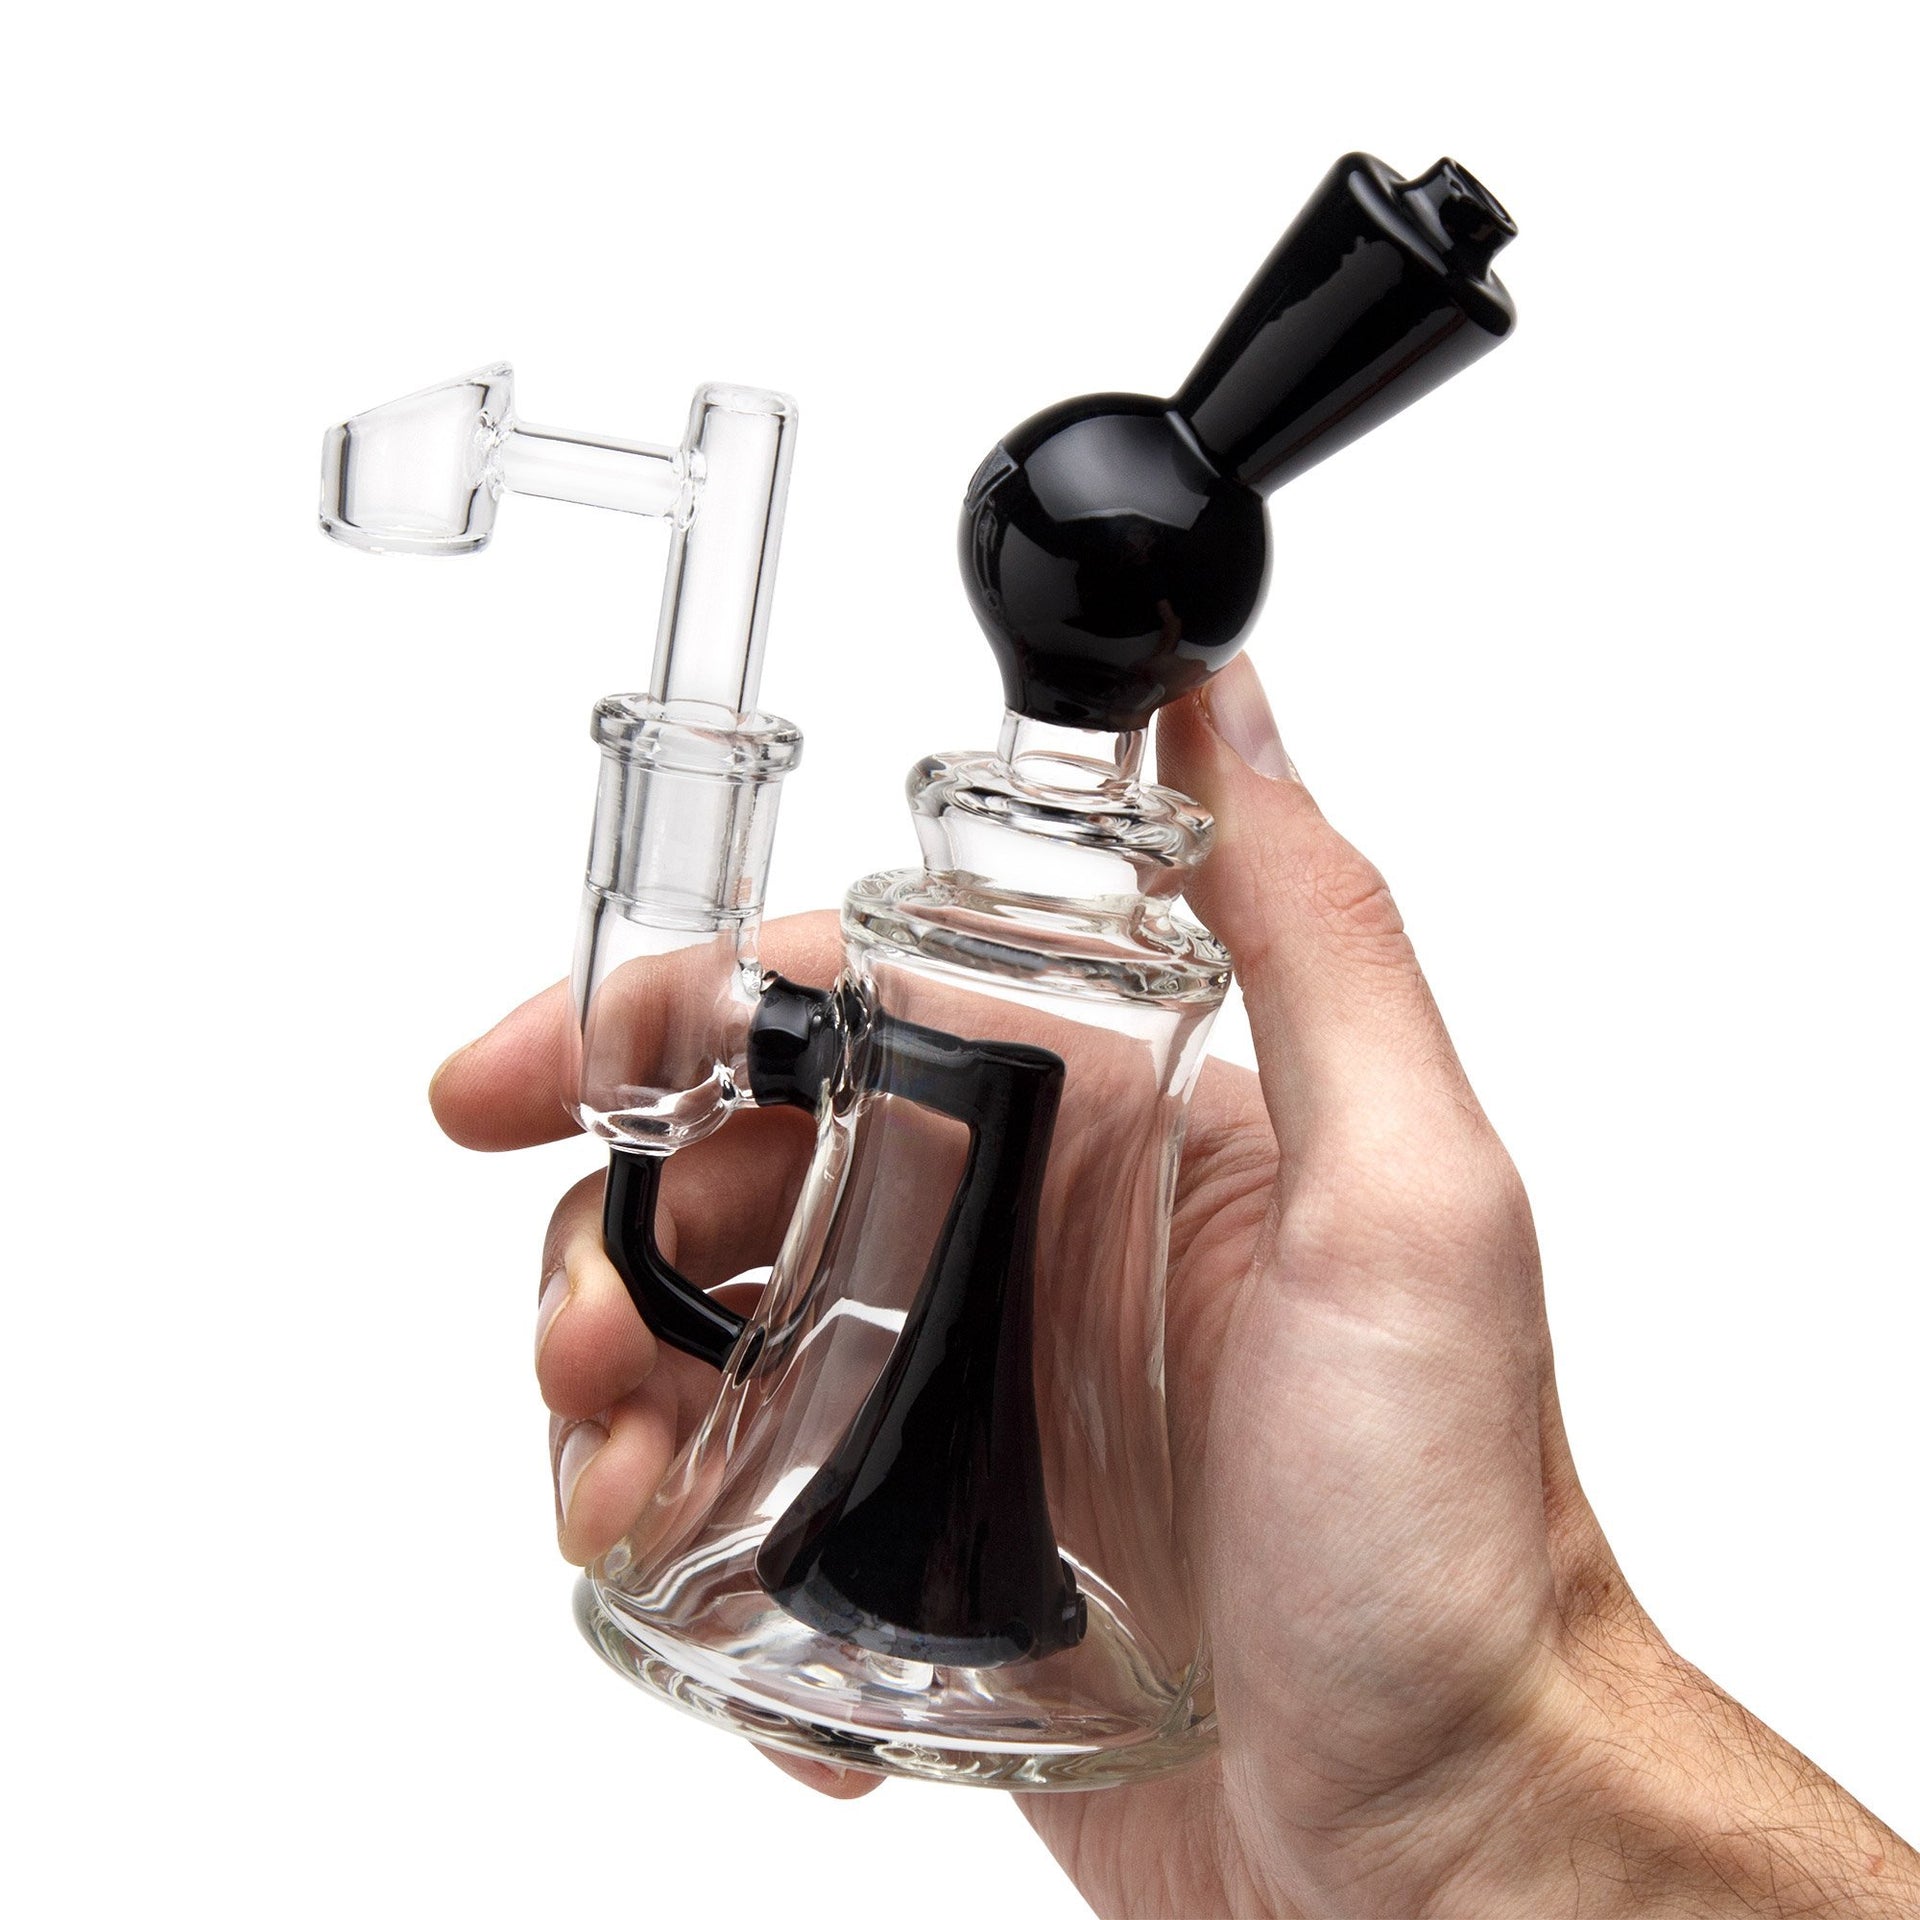 GRAV Orbis Coppa - 420 Science - The most trusted online smoke shop.